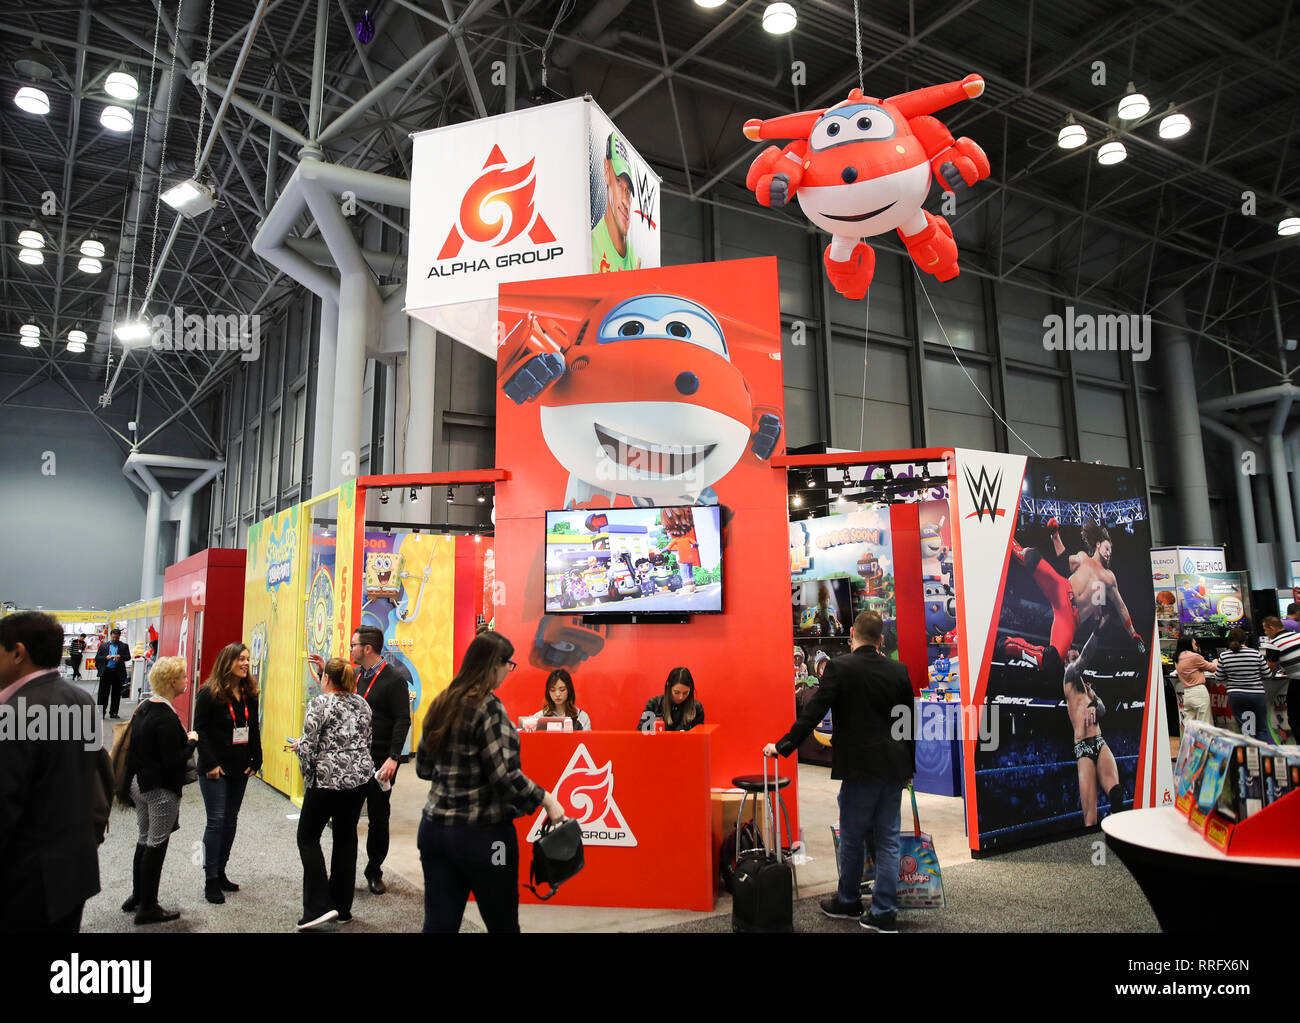 (190226) -- BEIJING, Feb. 26, 2019 (Xinhua) -- Cartoon character of Super Wings is seen at the booth of Alpha Group Co., Ltd., a major animation, toy and entertainment player from south China's Guangdong Province, during the 116th Annual North American International Toy Fair at the Jacob K. Javits Convention Center in New York, the United States, on Feb. 19, 2019. (Xinhua/Wang Ying) Stock Photo